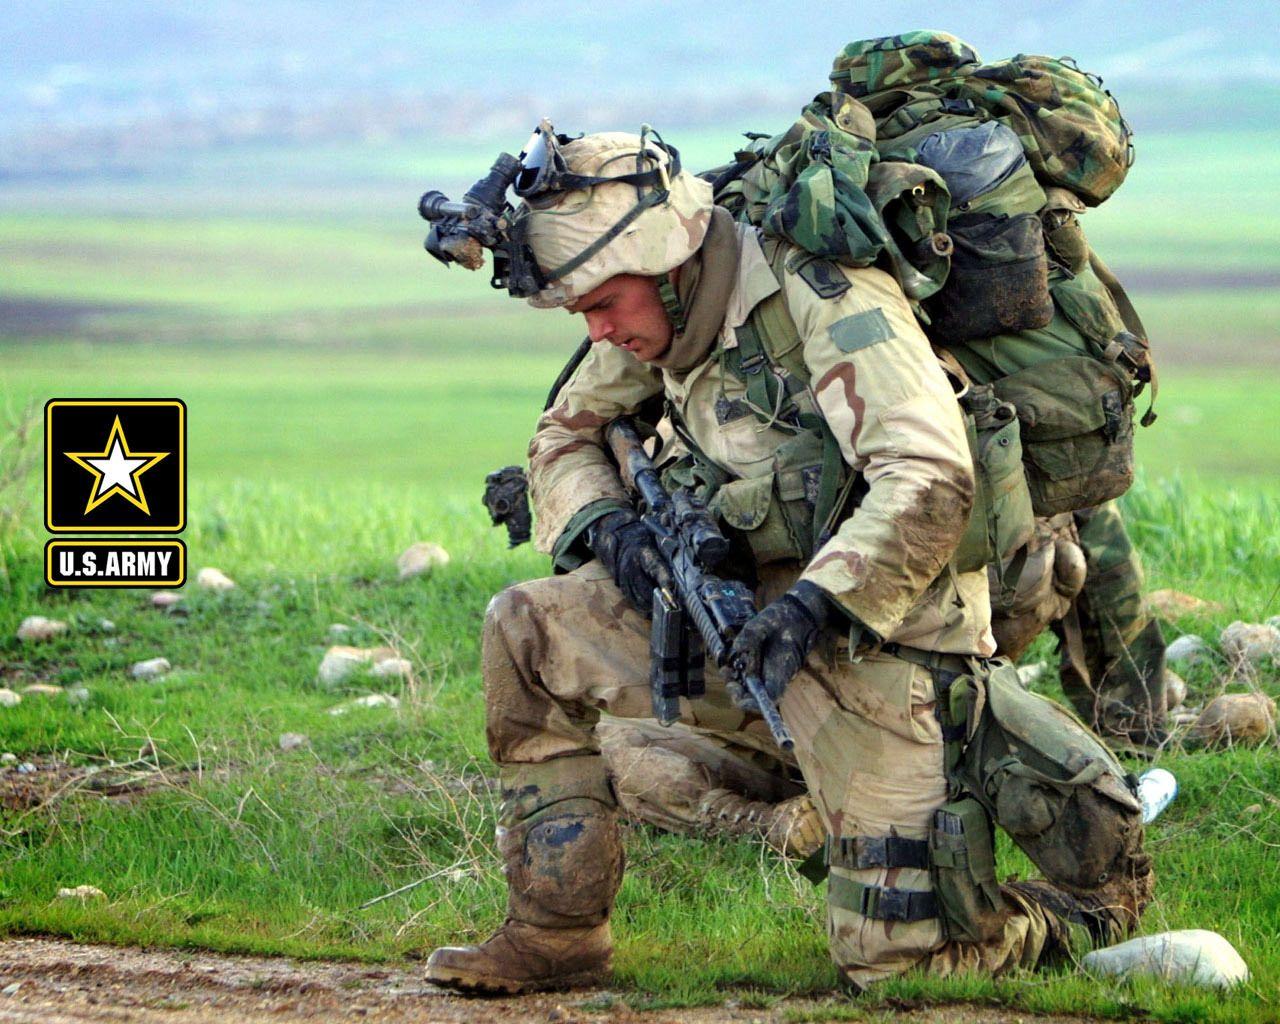 US Army soldier wallpaper. US Army soldier